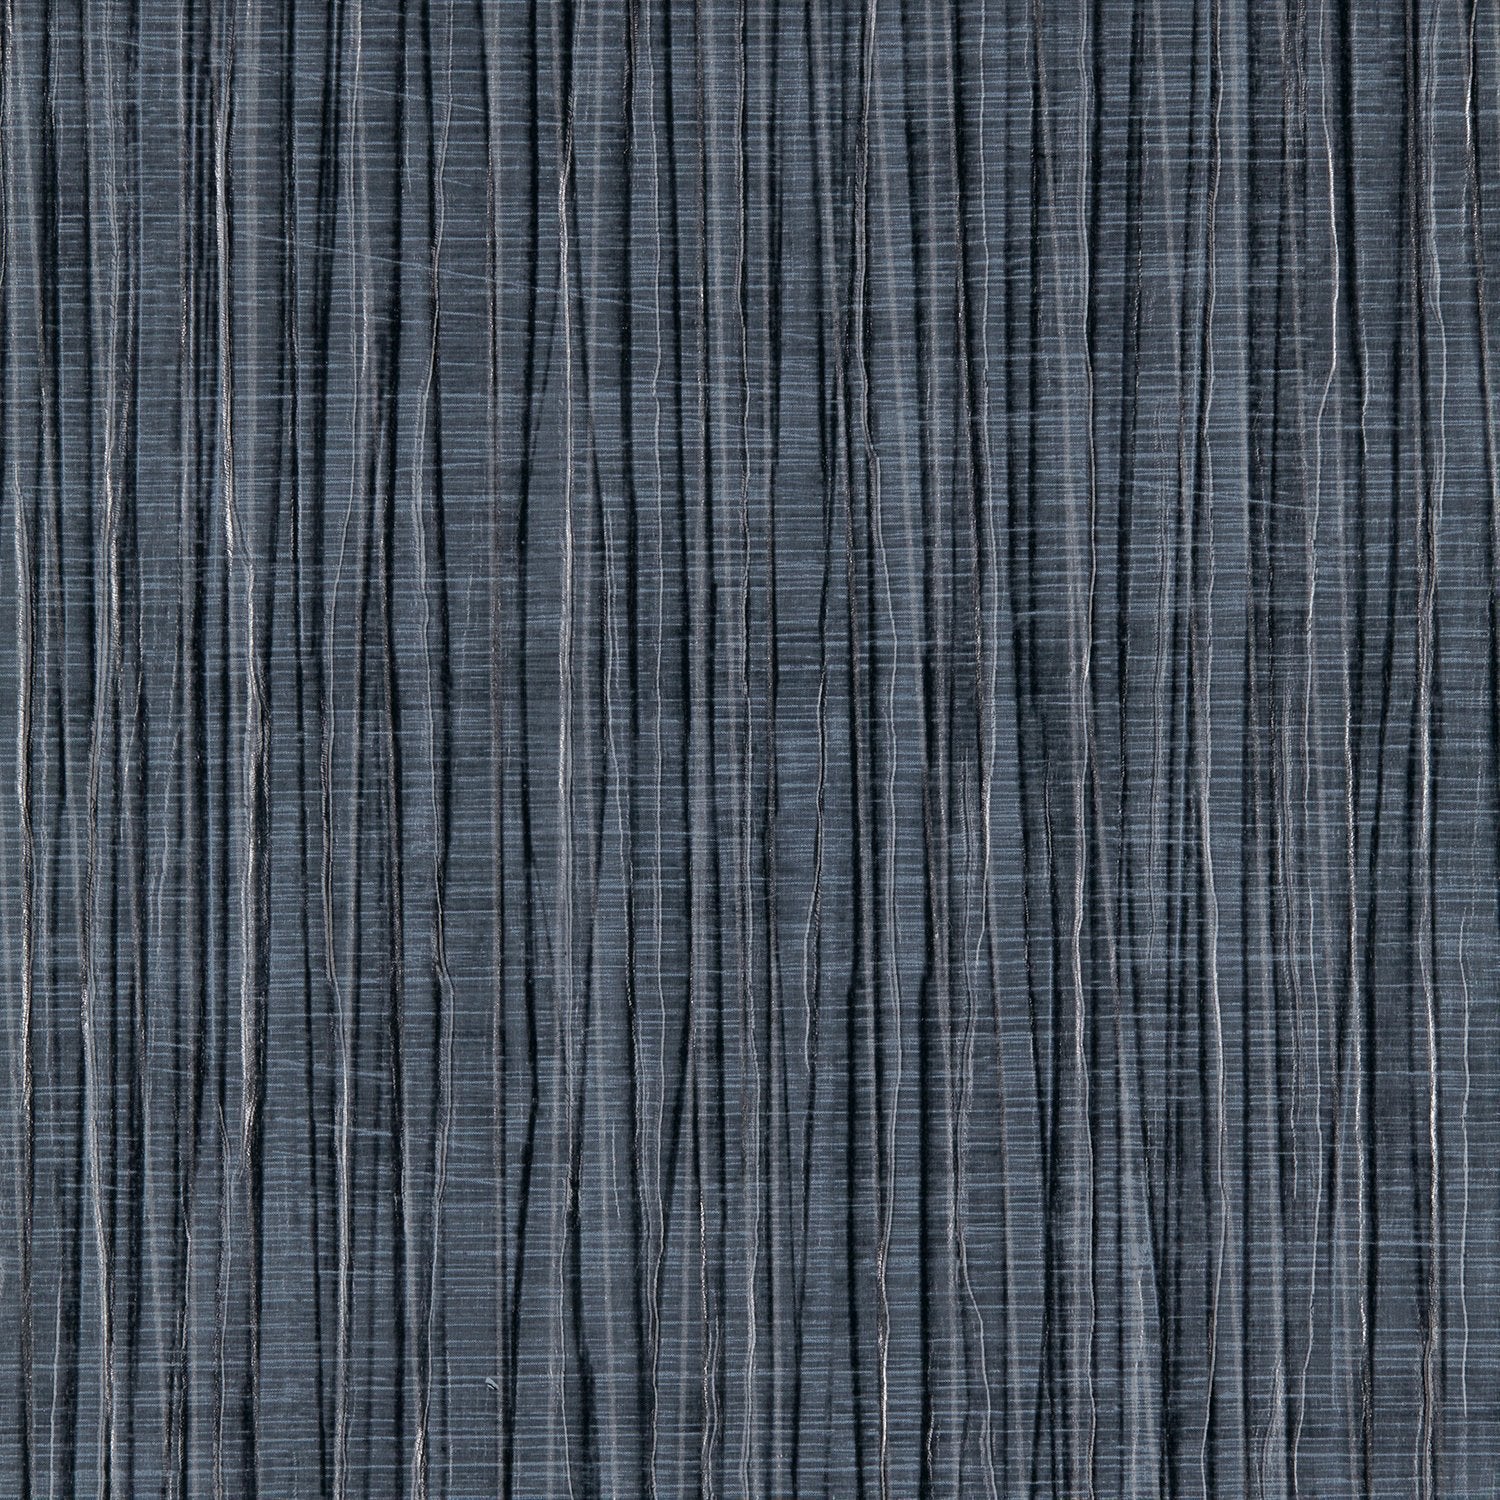 Vogue Pleat - Y47016 - Wallcovering - Vycon - Kube Contract